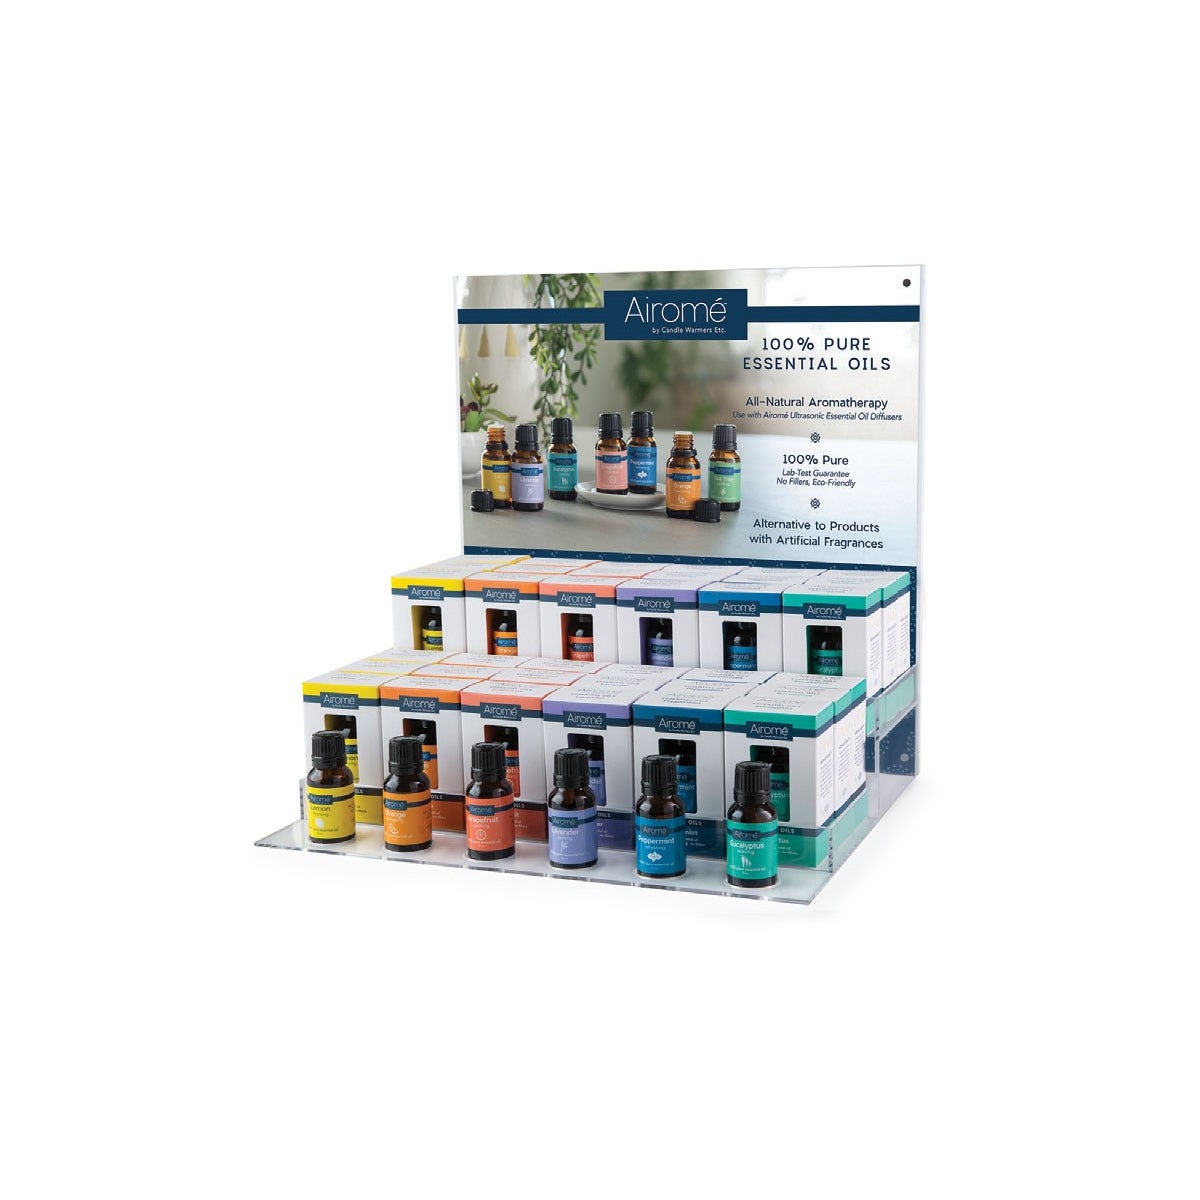 Display - Holds 36 Essential Oils